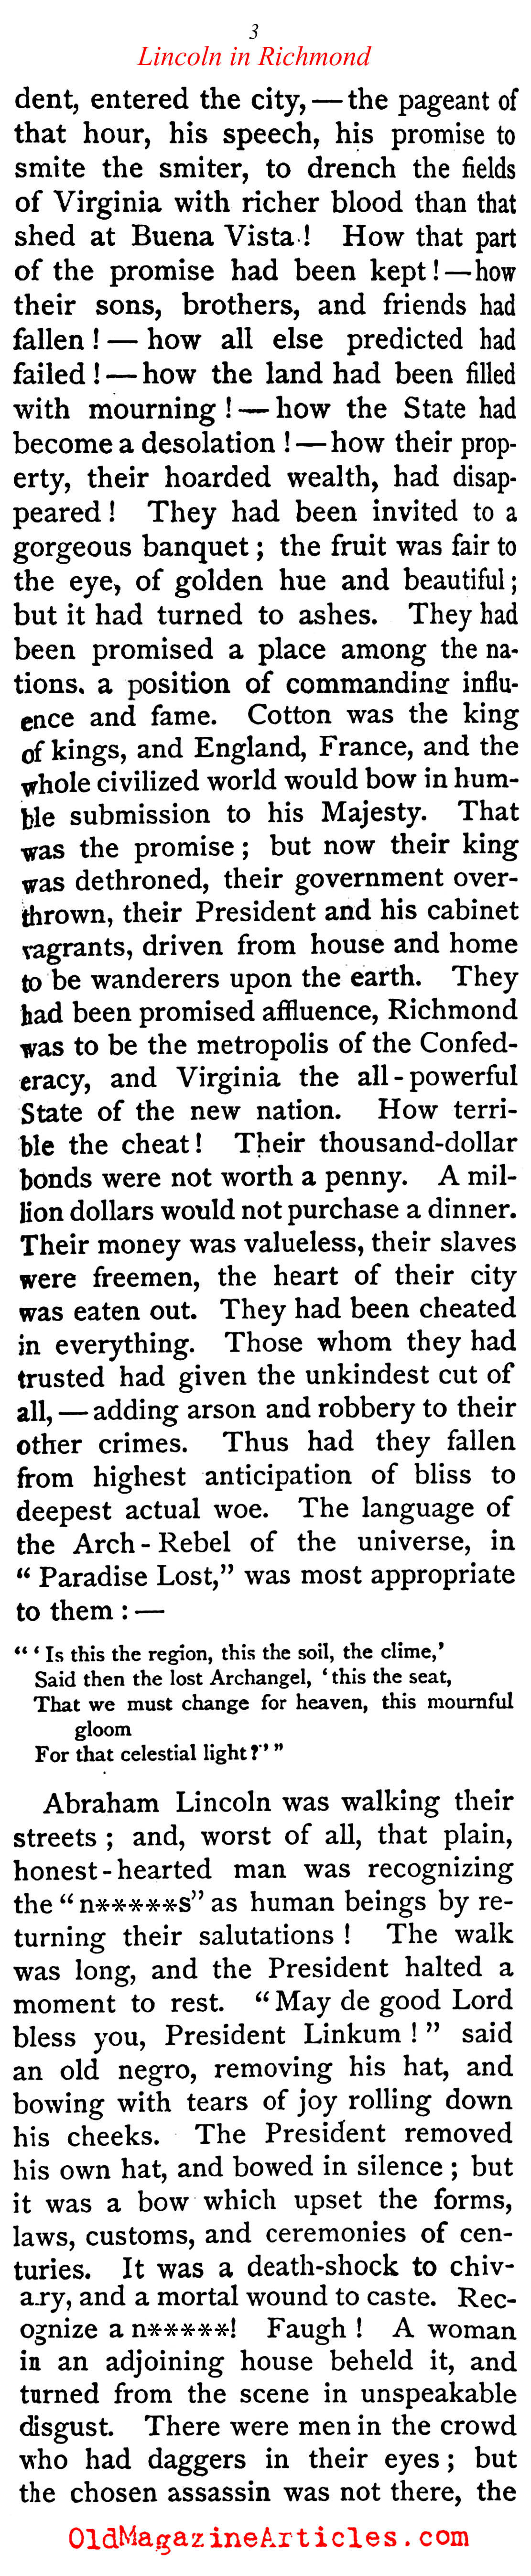 An Eyewitness Account of Lincoln's Visit to Richmond  (Atlantic Monthly, 1865)